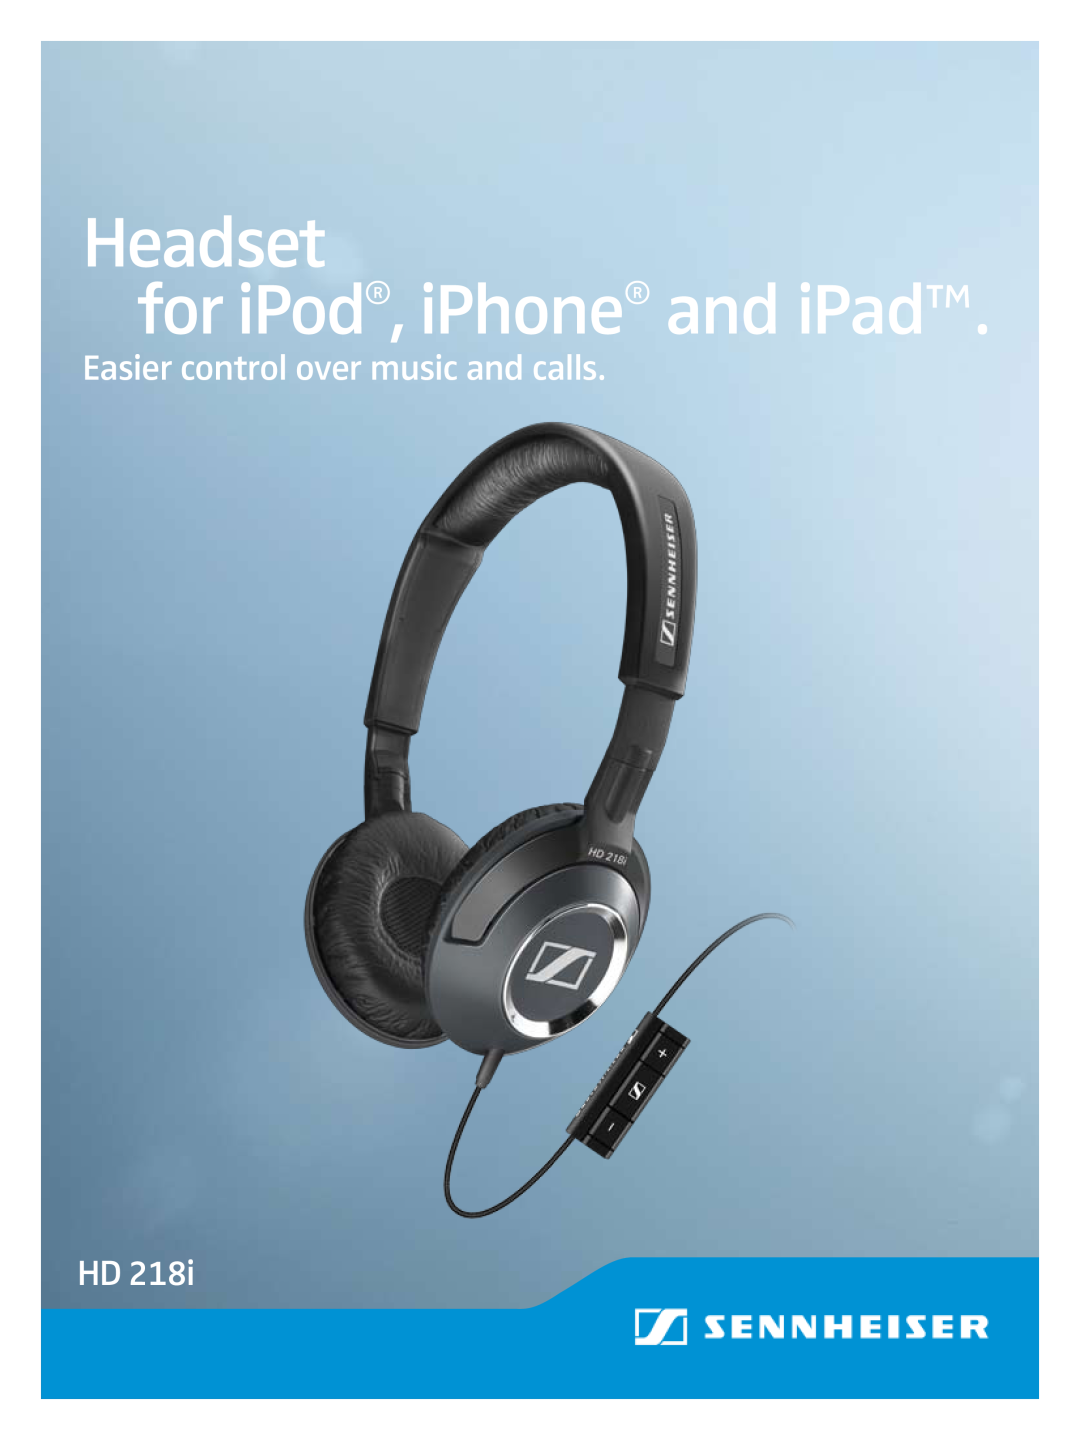 Sennheiser HD 218i manual Headset, for iPod, iPhone and iPad, Easier control over music and calls 